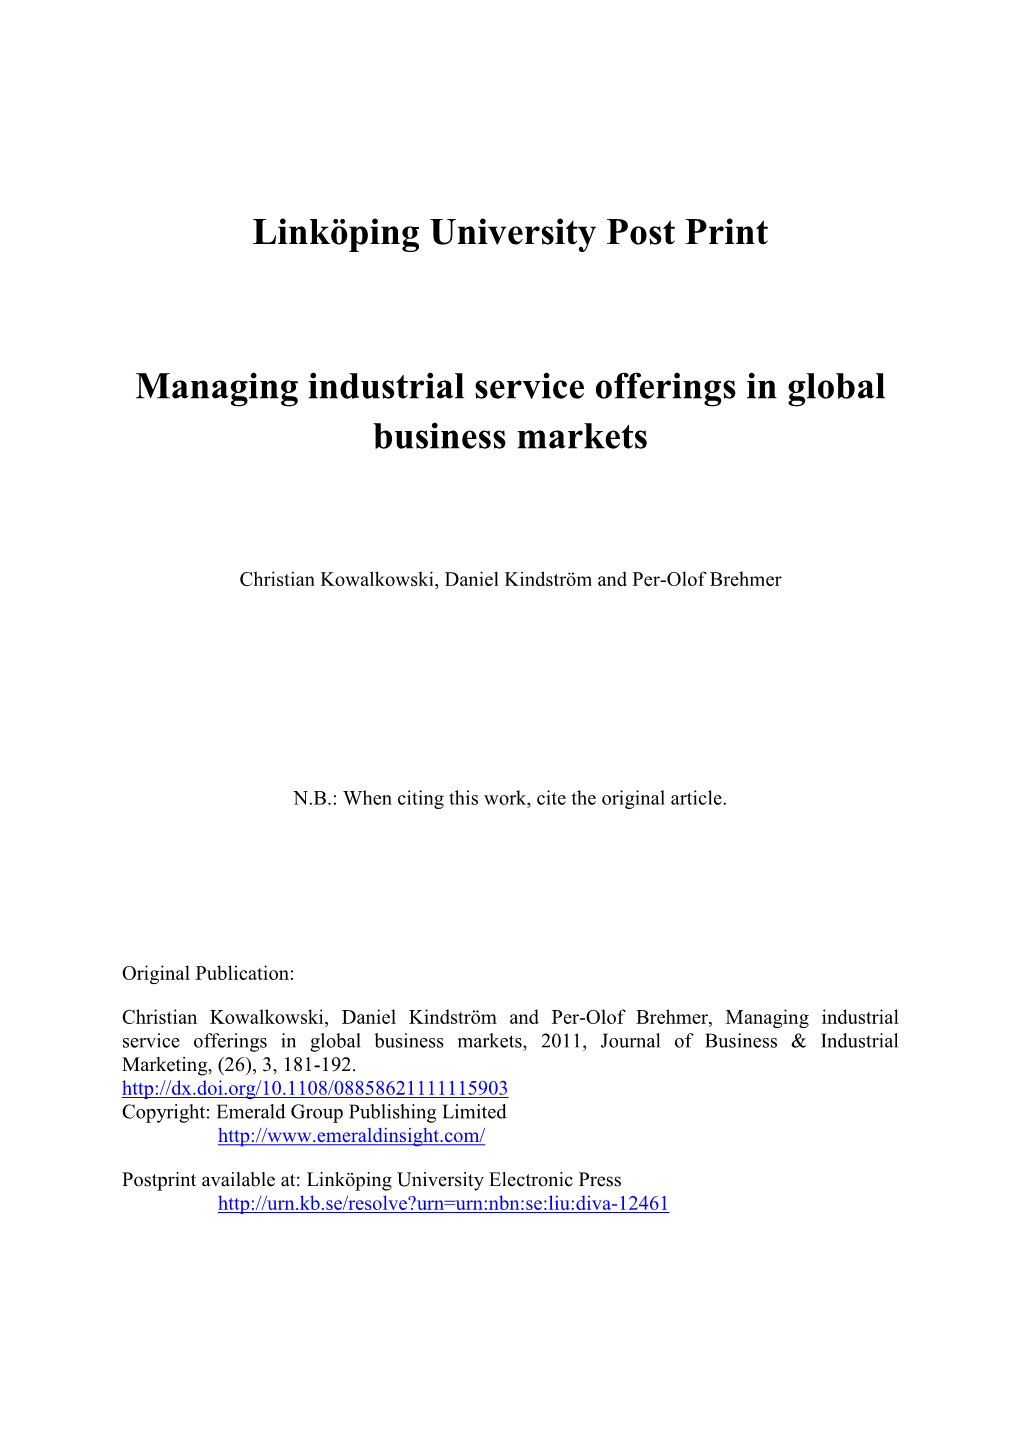 Managing Industrial Service Offerings in Global Business Markets